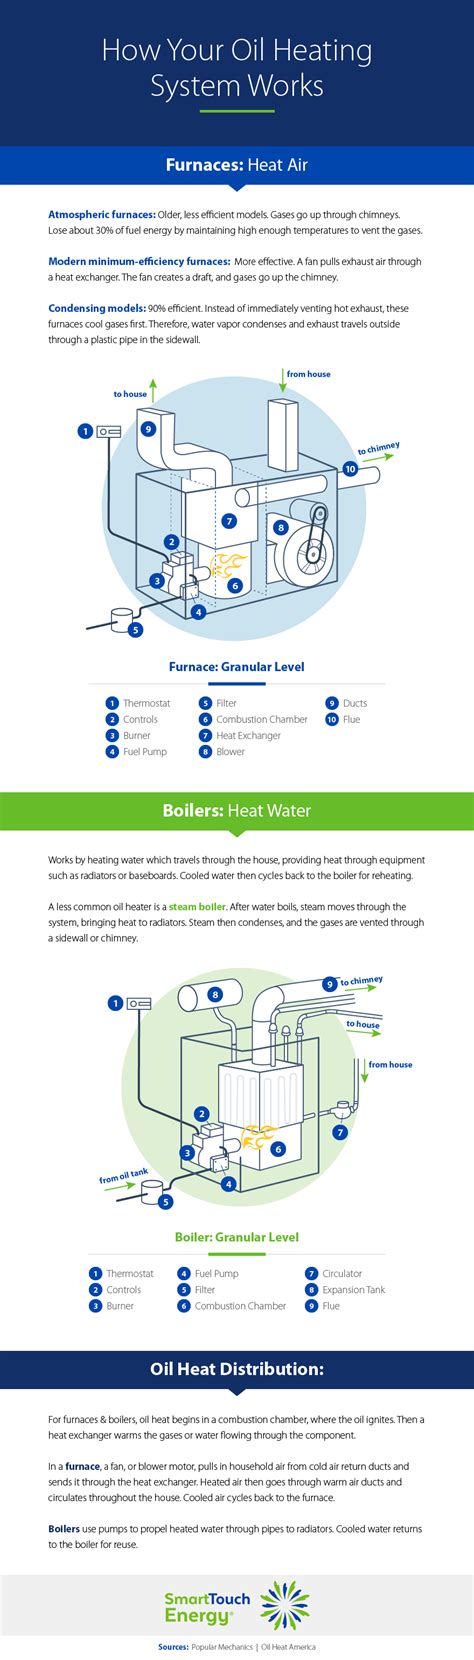 How Your Oil Heating System Works